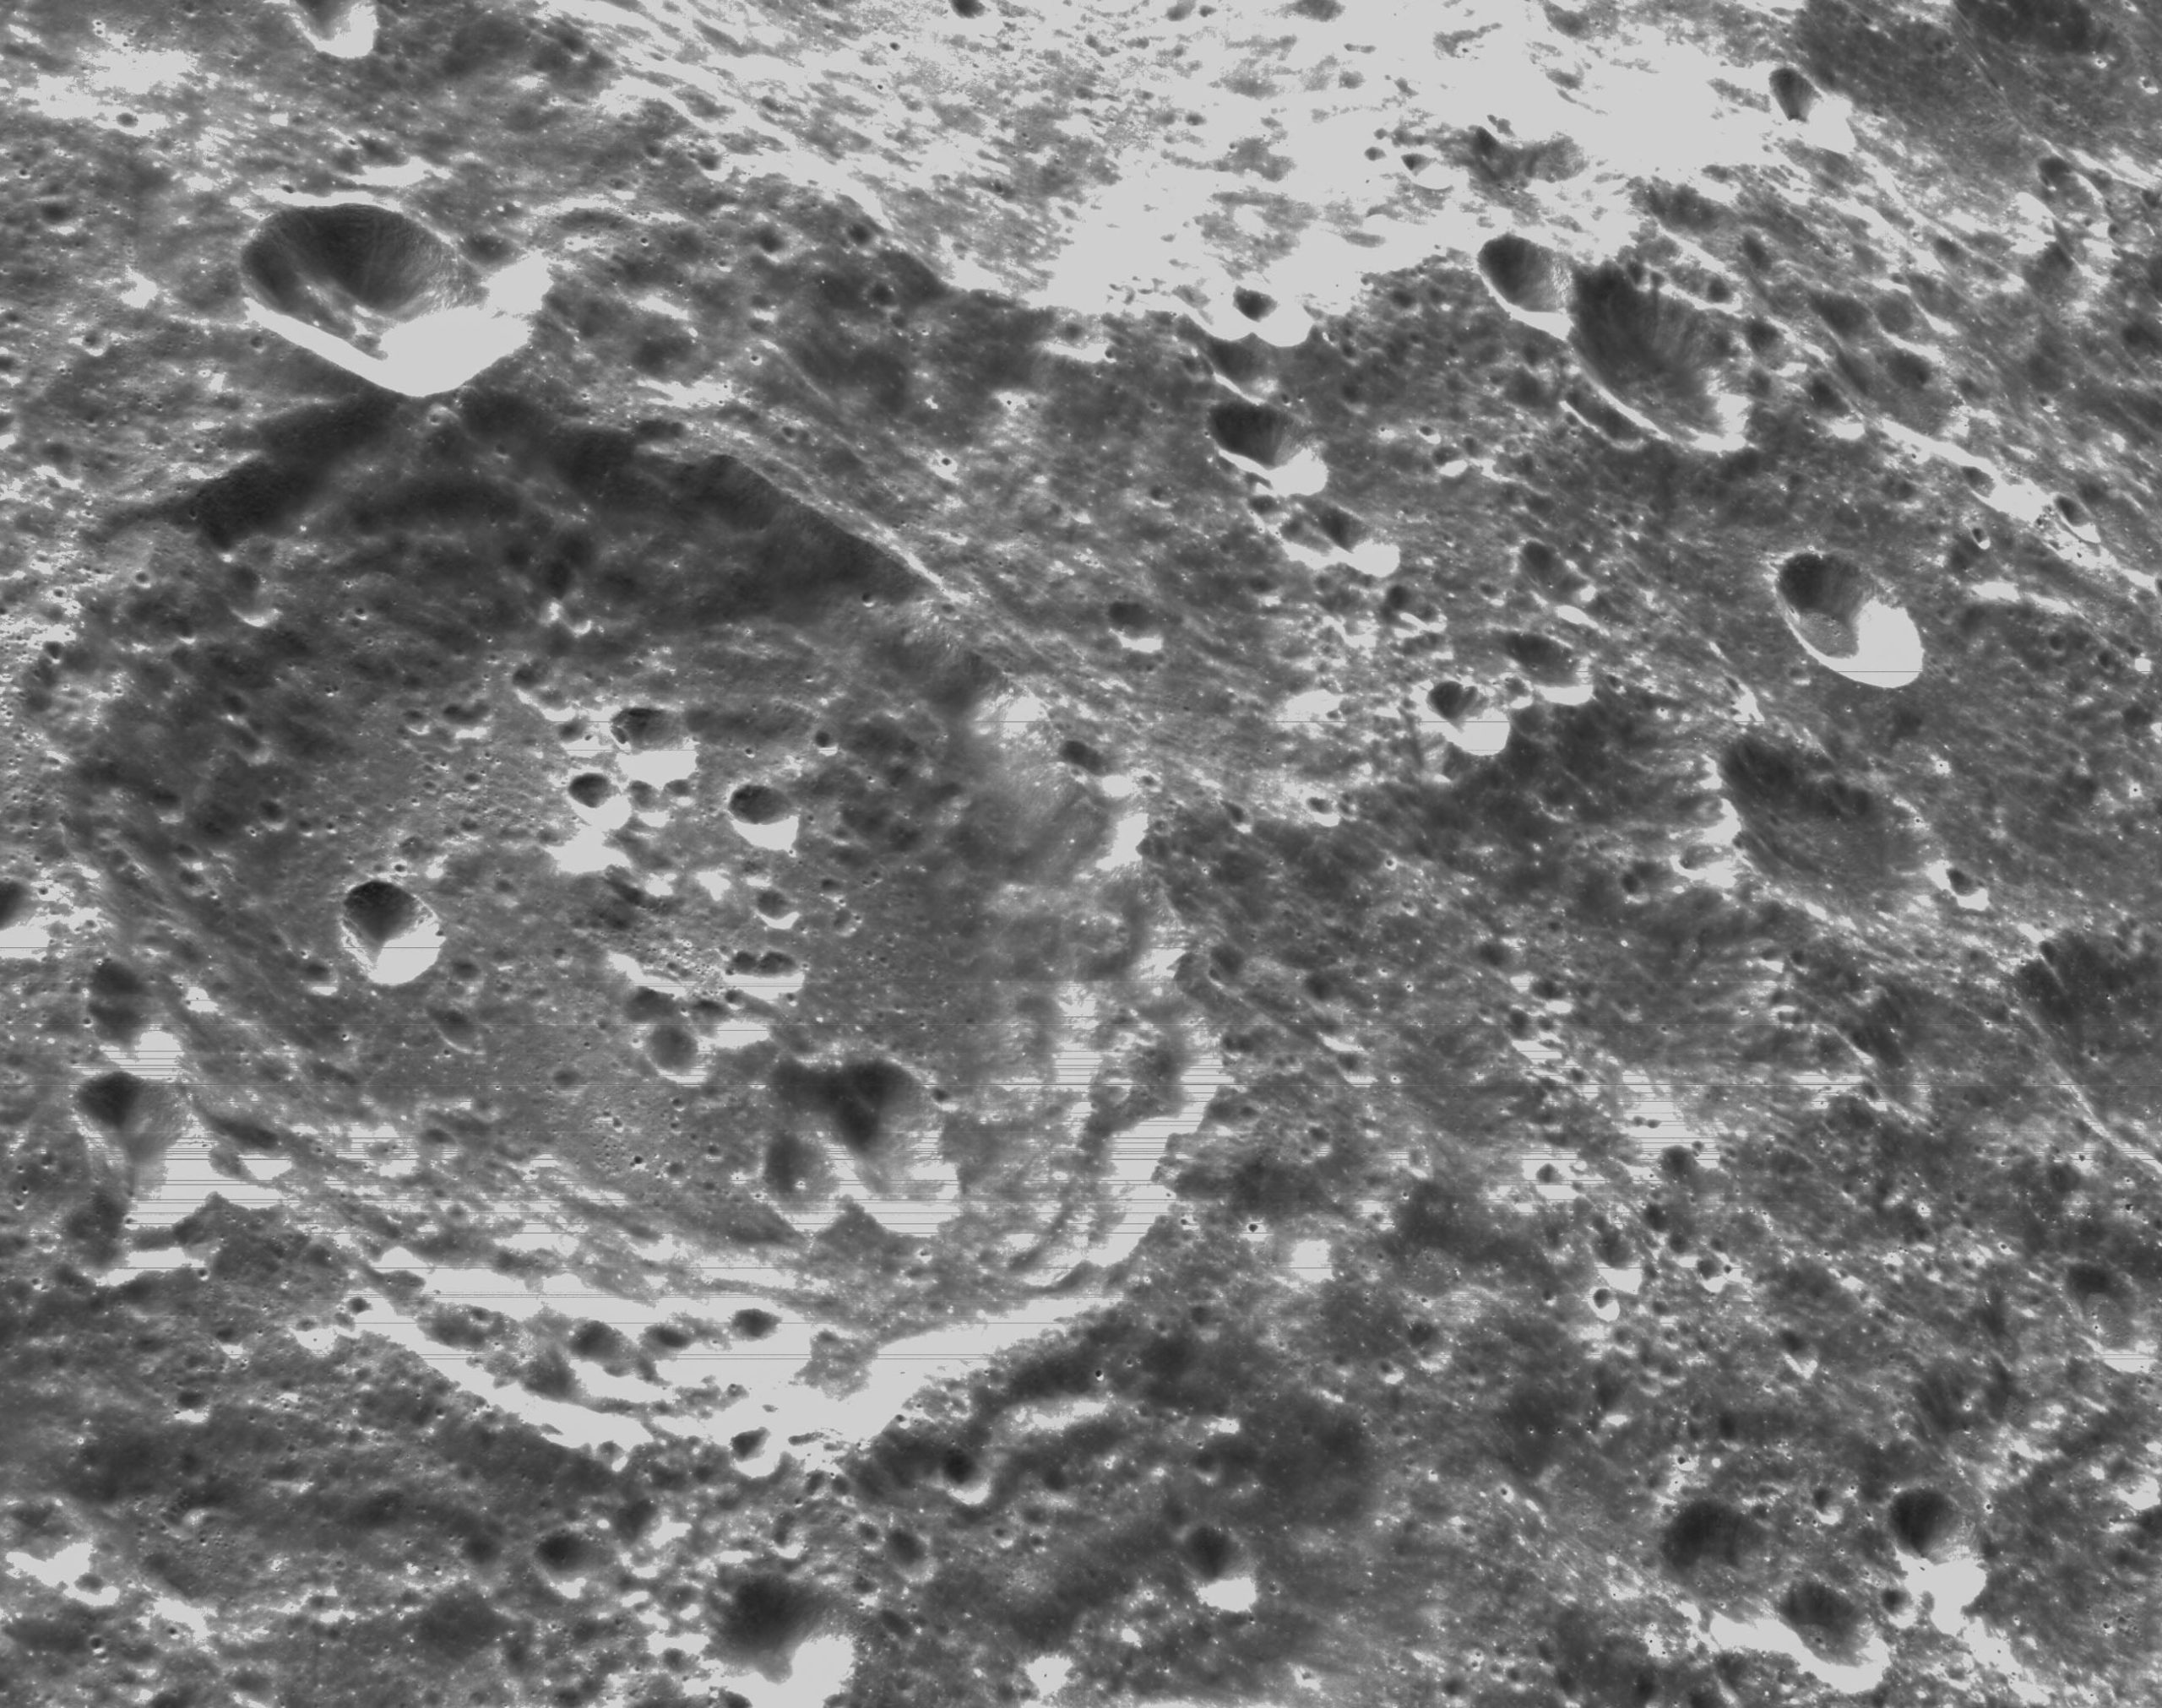 See the Far Side of the Moon: Incredibly Detailed Pictures From Artemis I Orion Close Lunar Flyby – SciTechDaily